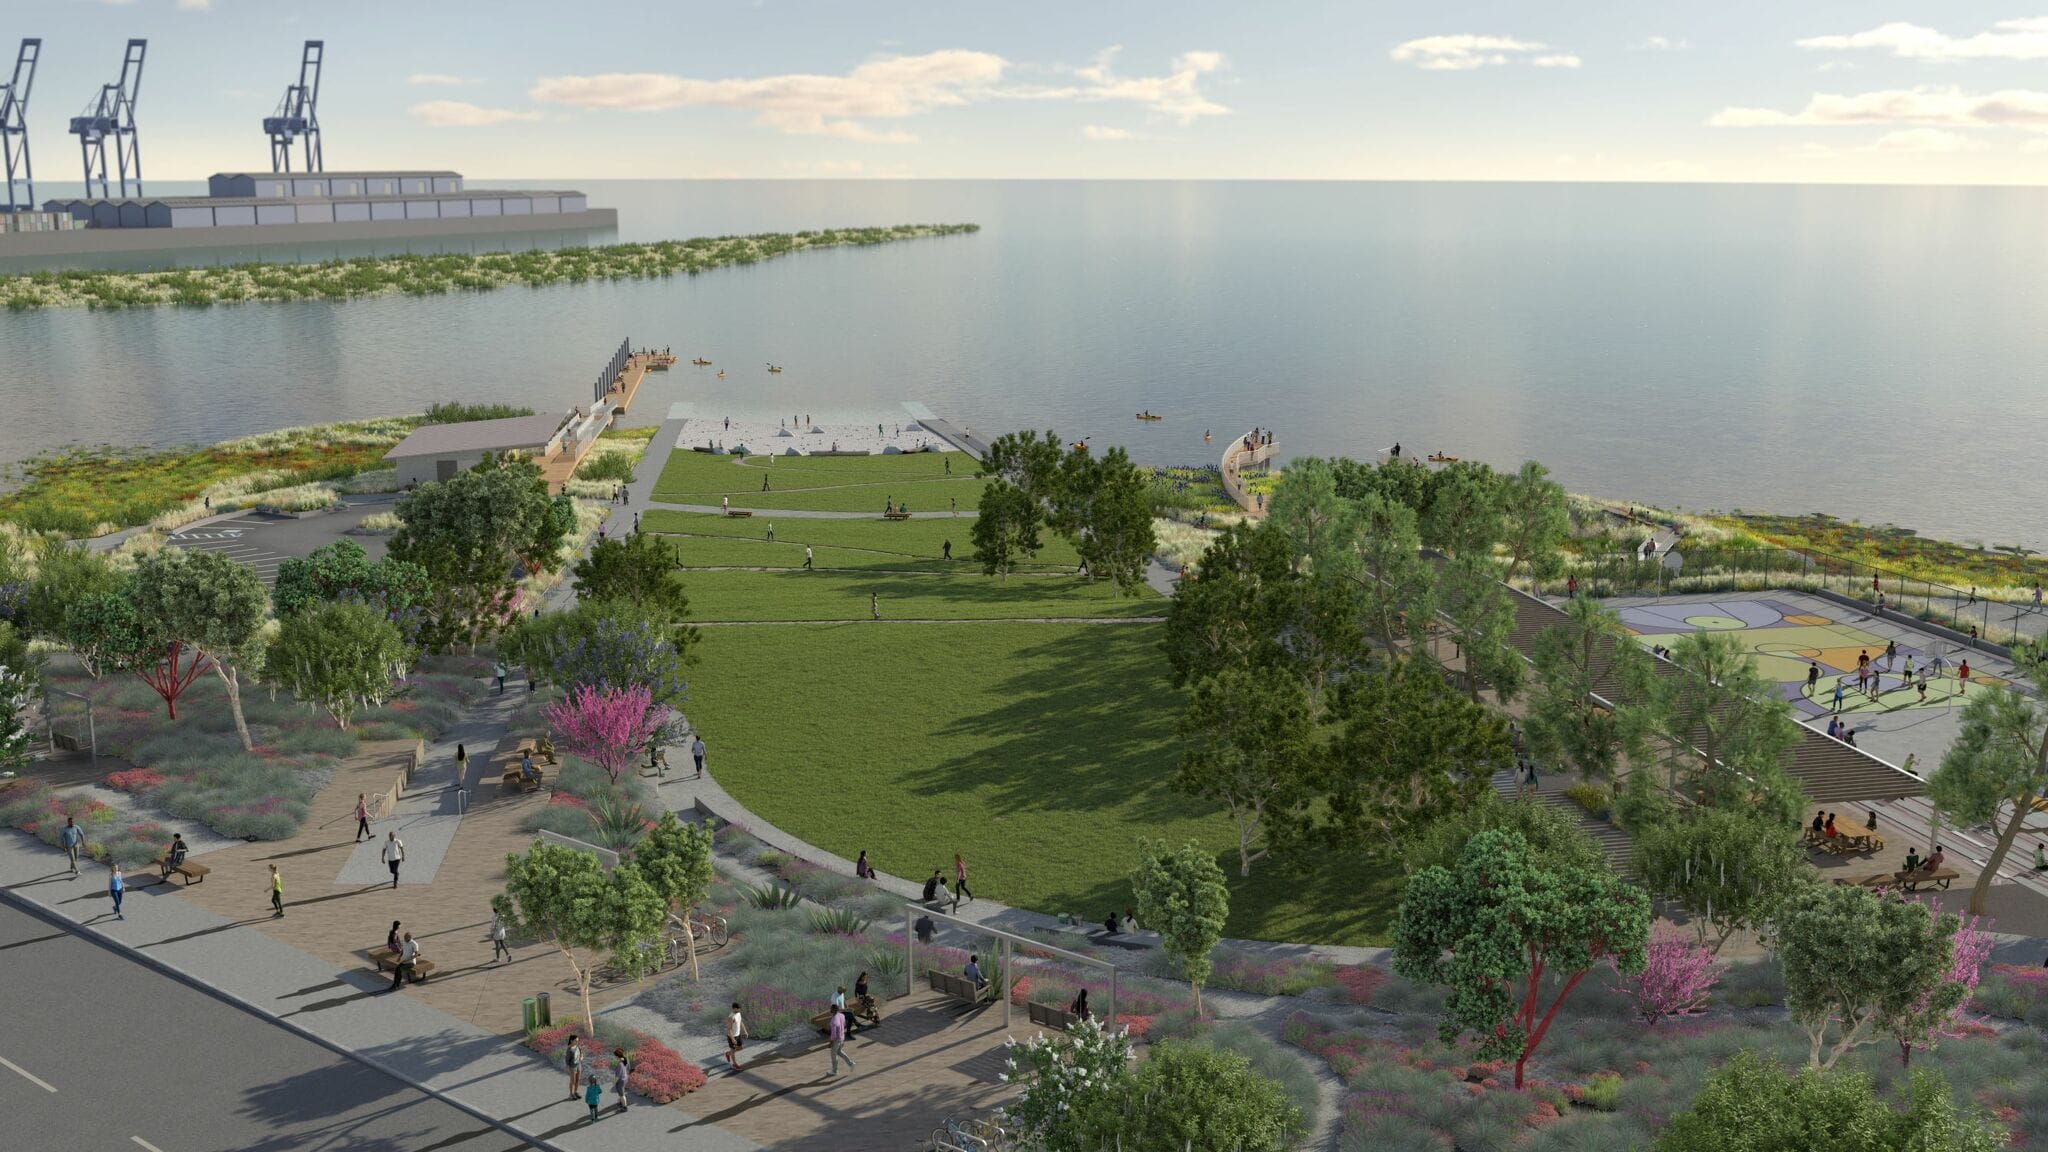 An artist's rendering of a park near the water.